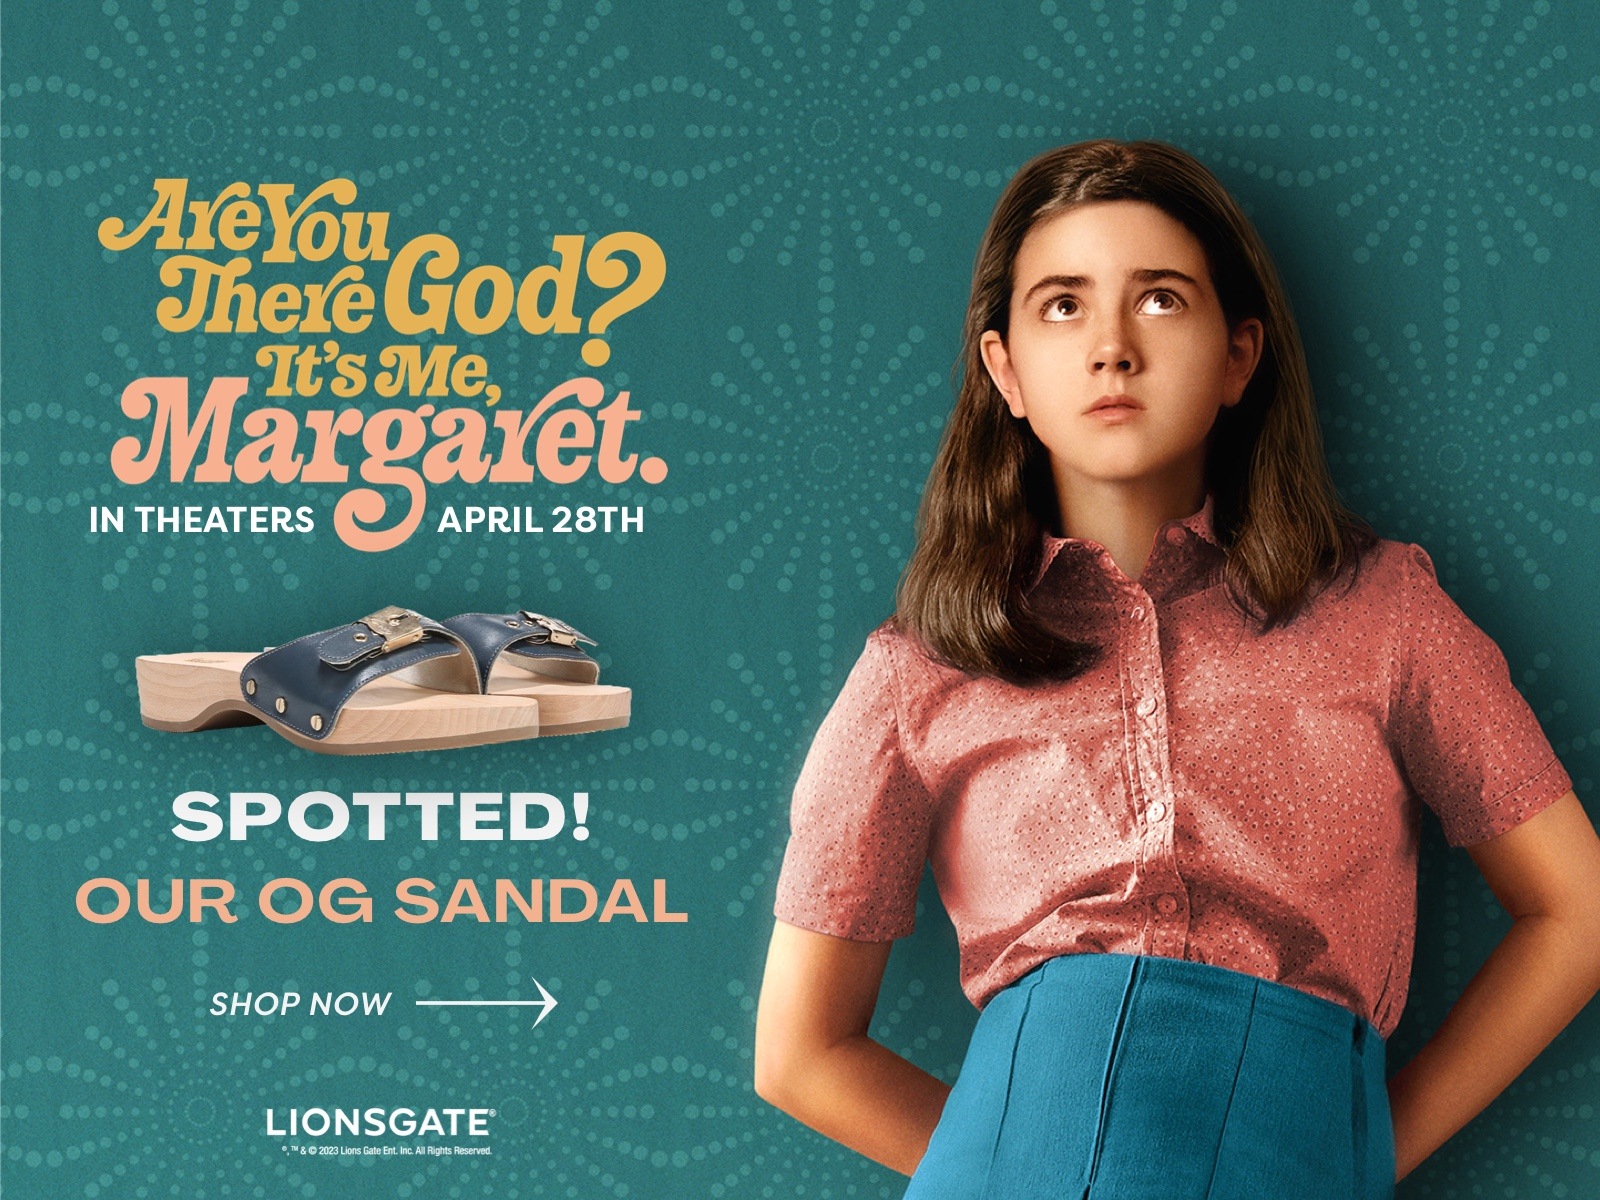 Our Original Sandal can be seen in the film Are You There God? It's Me, Margaret.